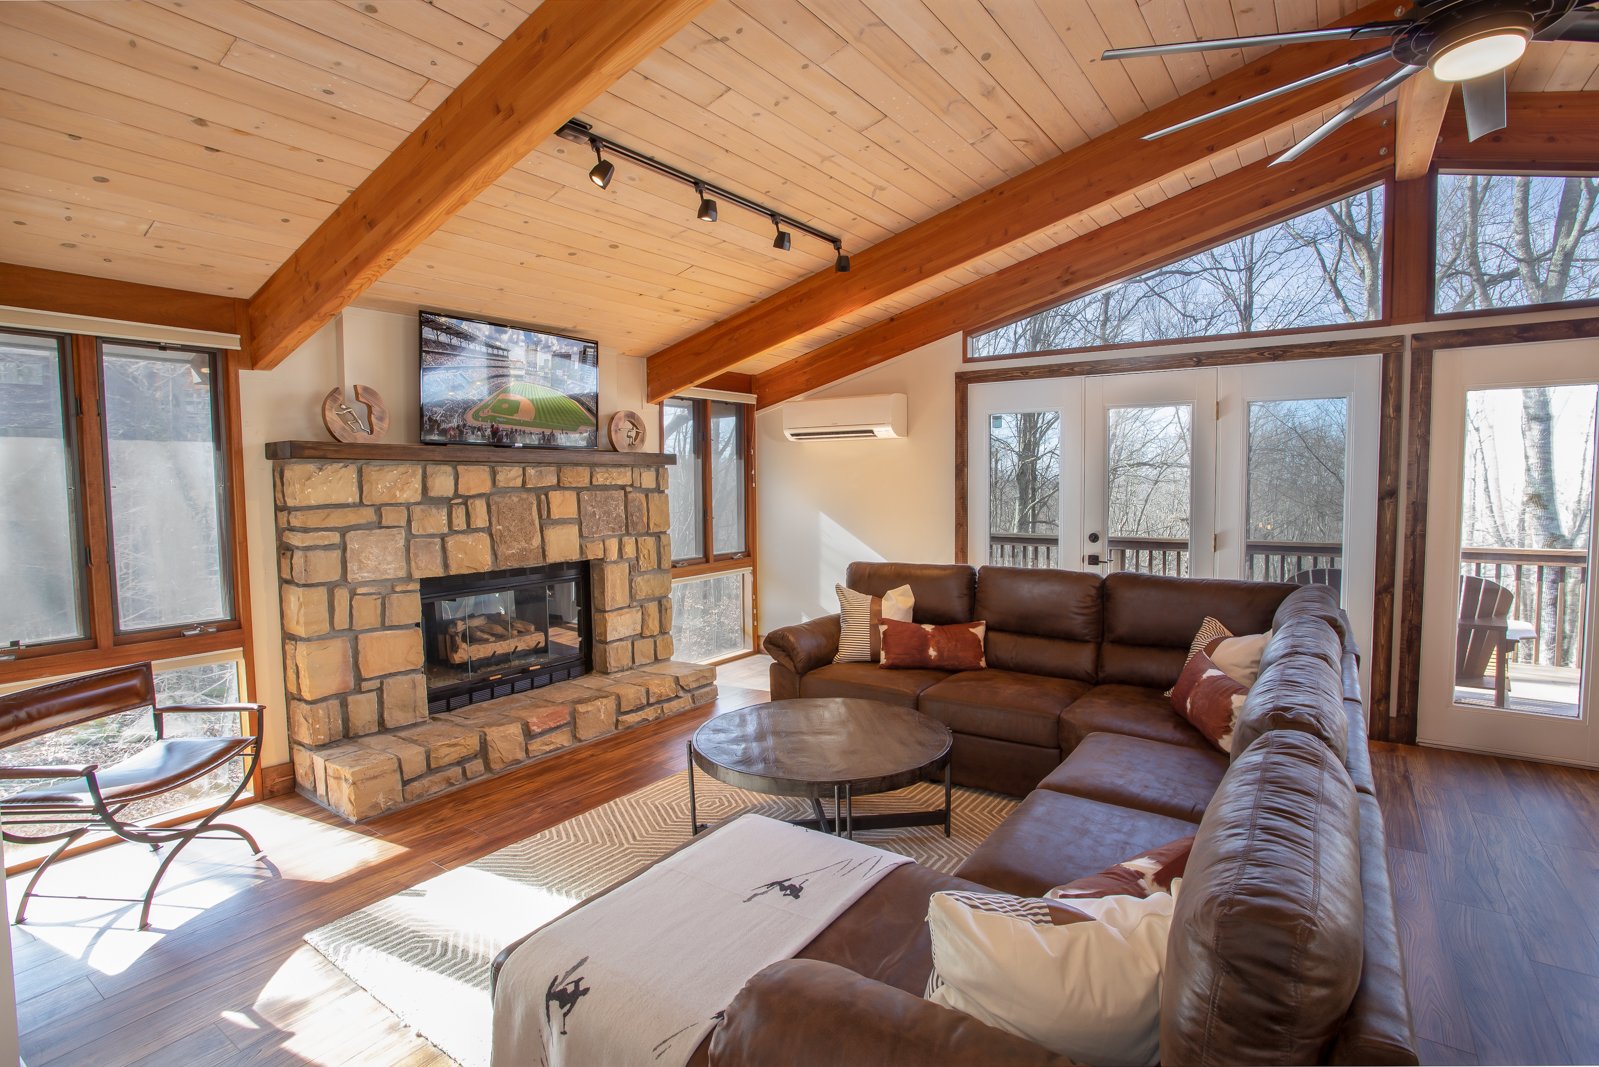 Living Room with Stone Fireplace, HD Smart TV, Comfy Leather Furniture